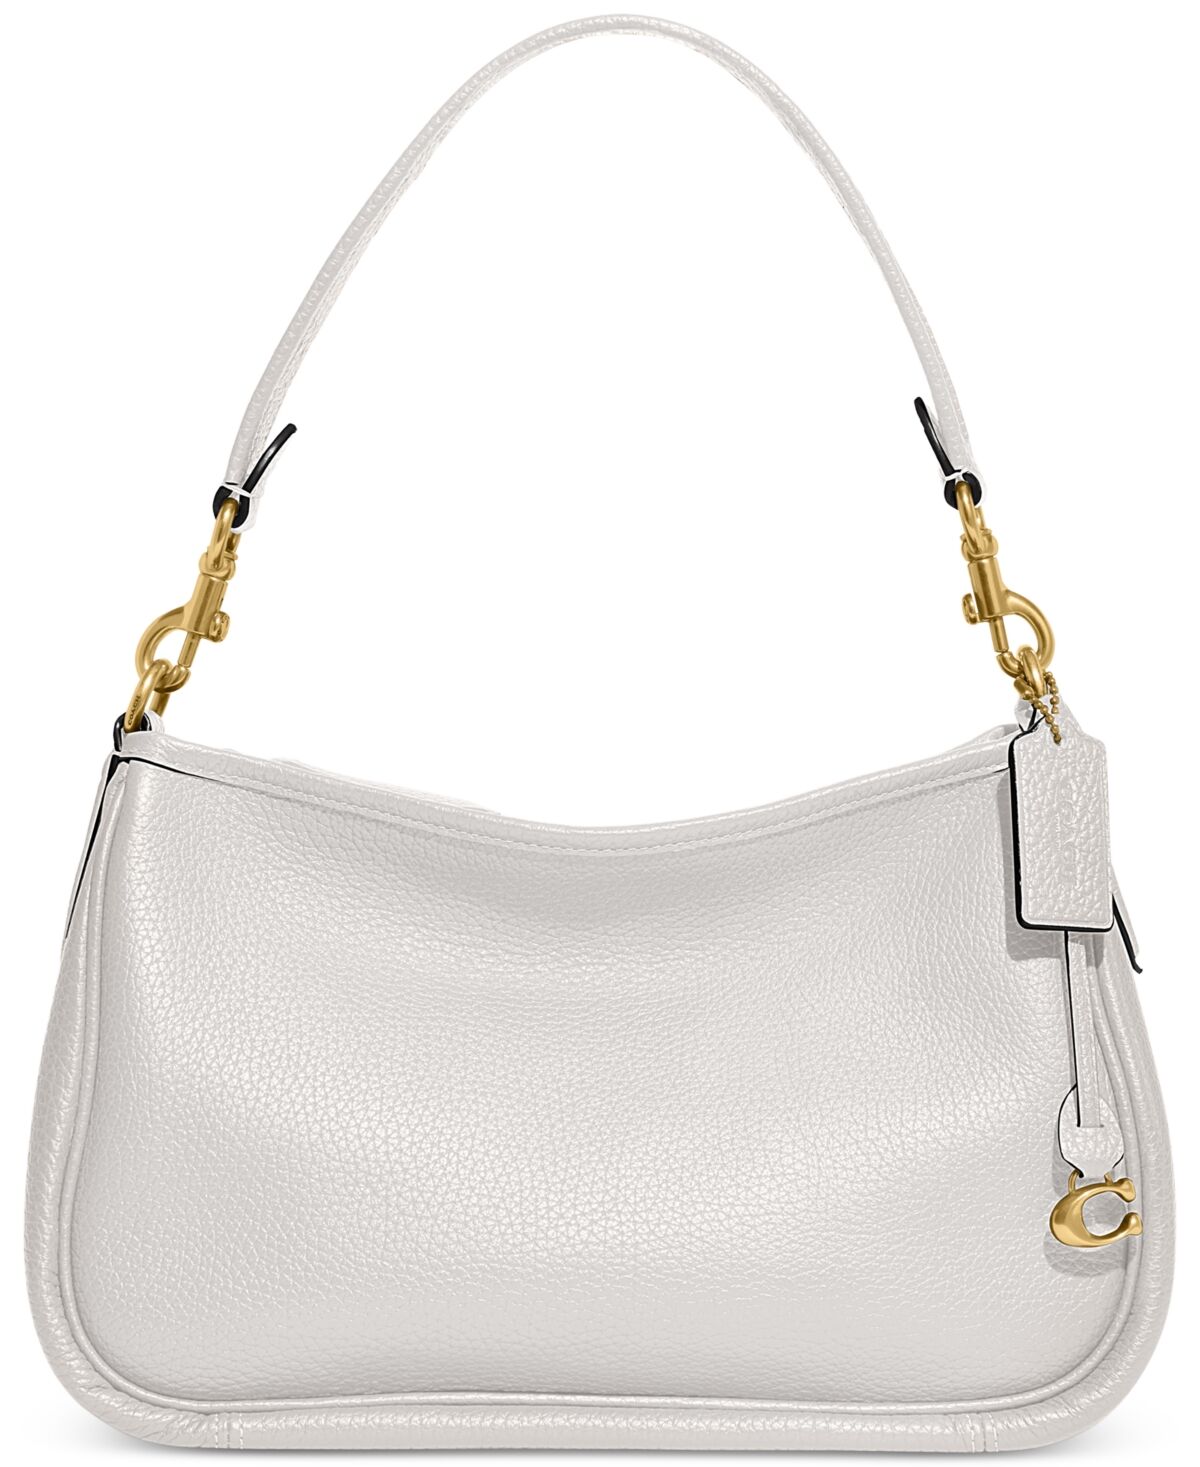 Coach Soft Pebble Leather Cary Shoulder Bag with Convertible Straps - Chalk